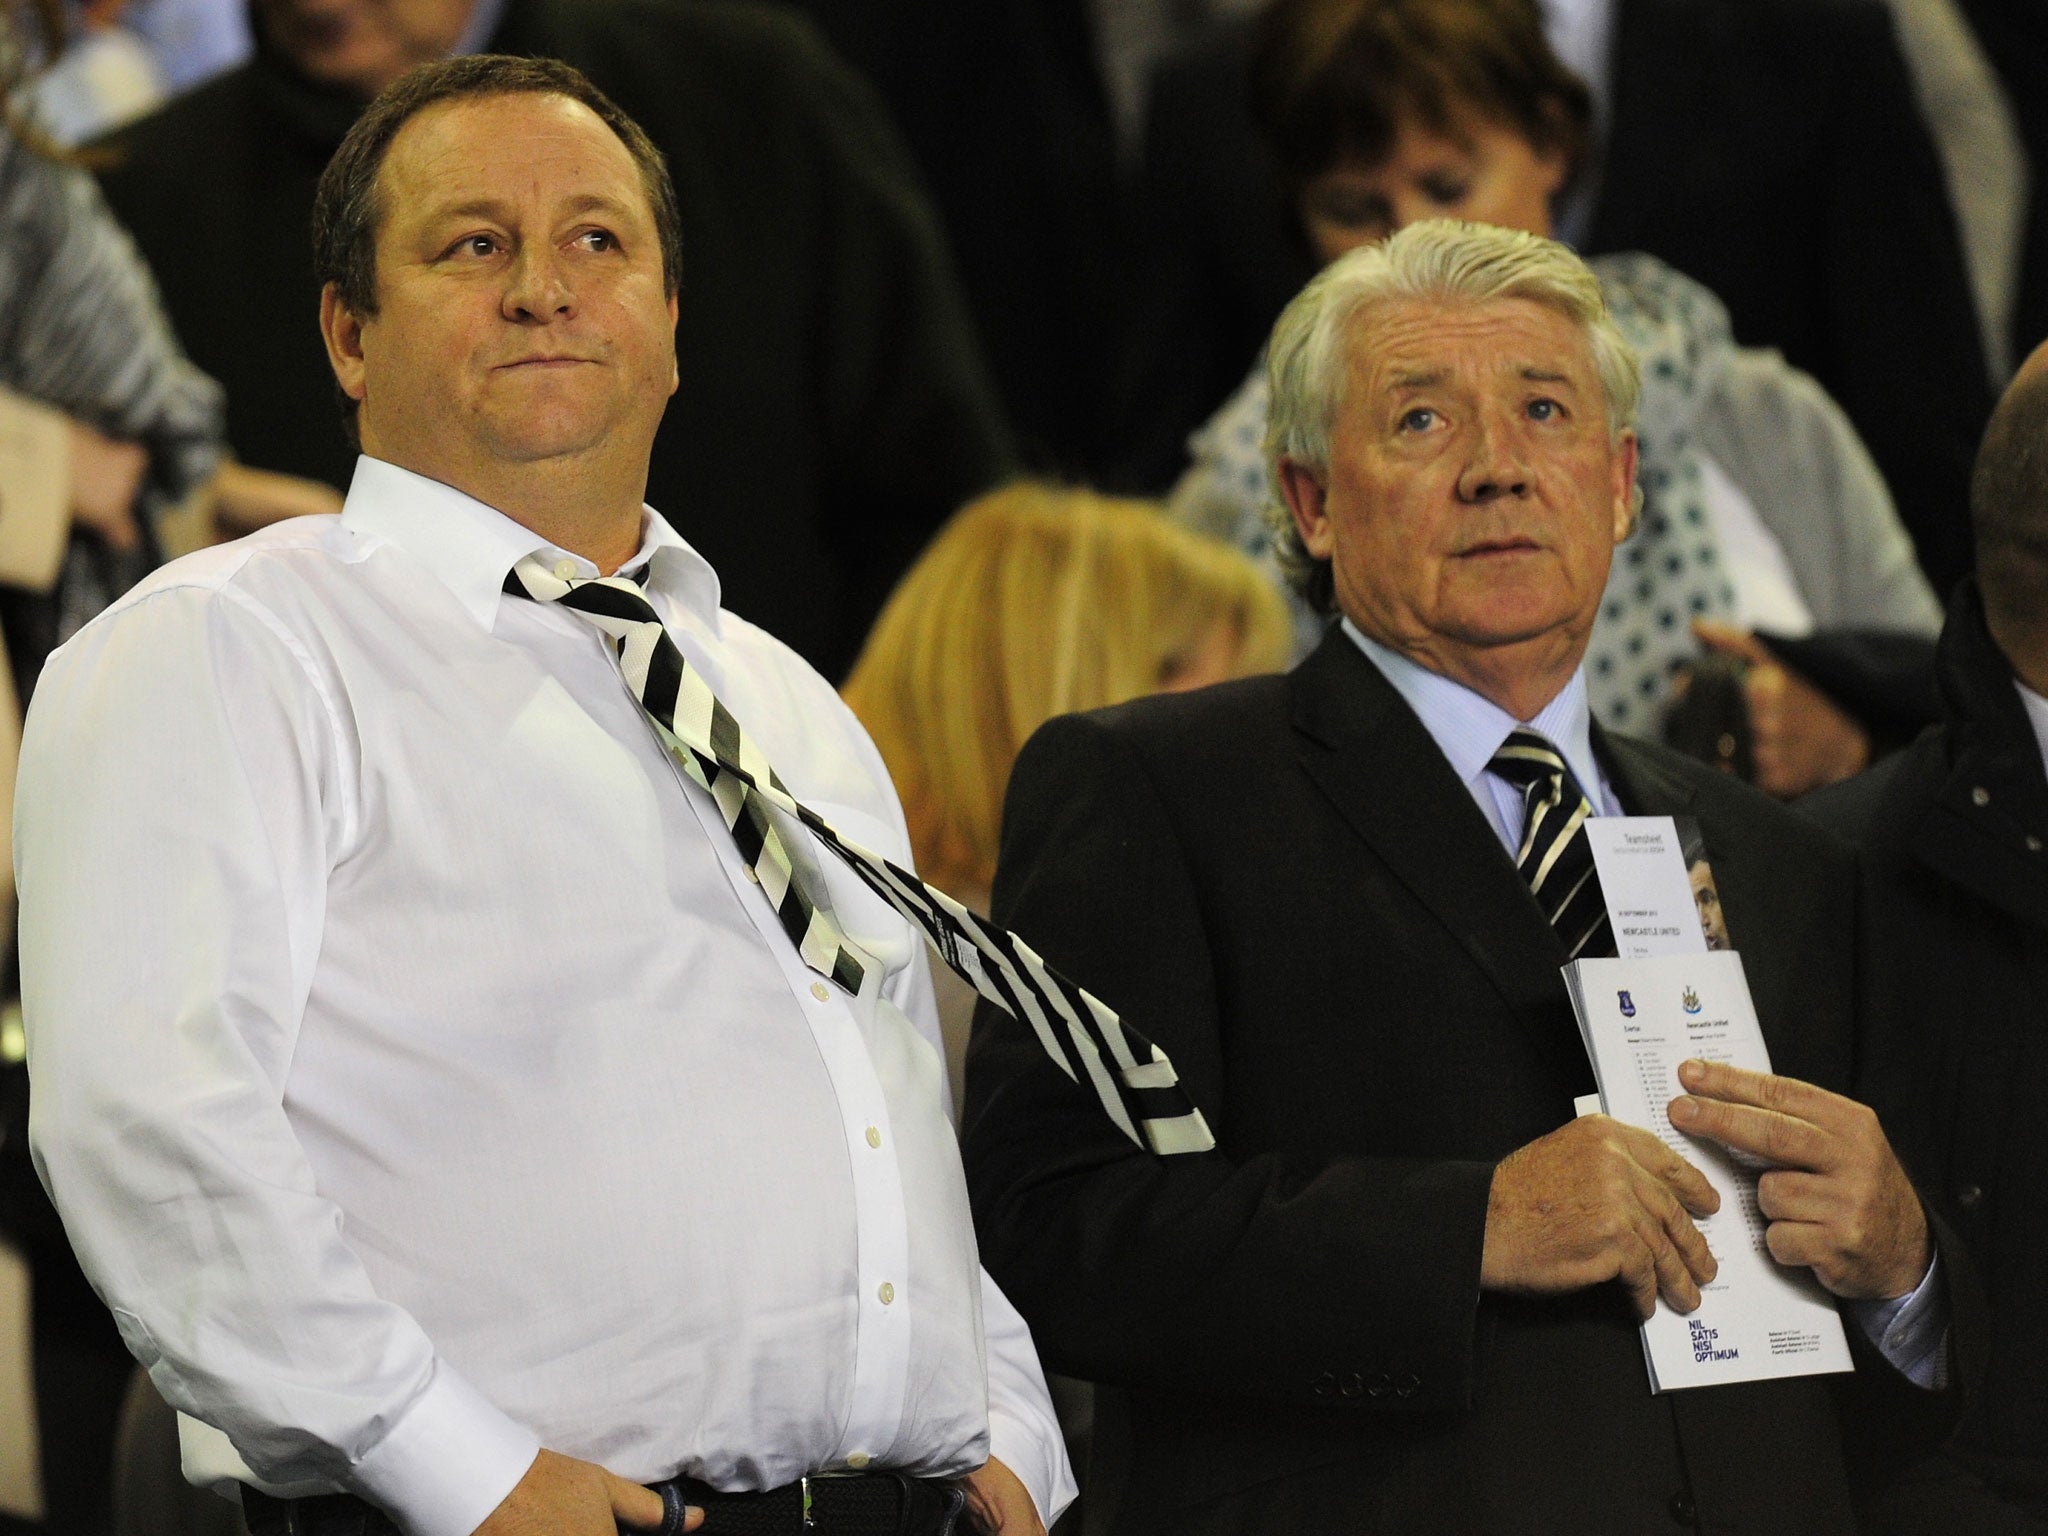 Joe Kinnear has resigned from his role as director of football at Newcastle